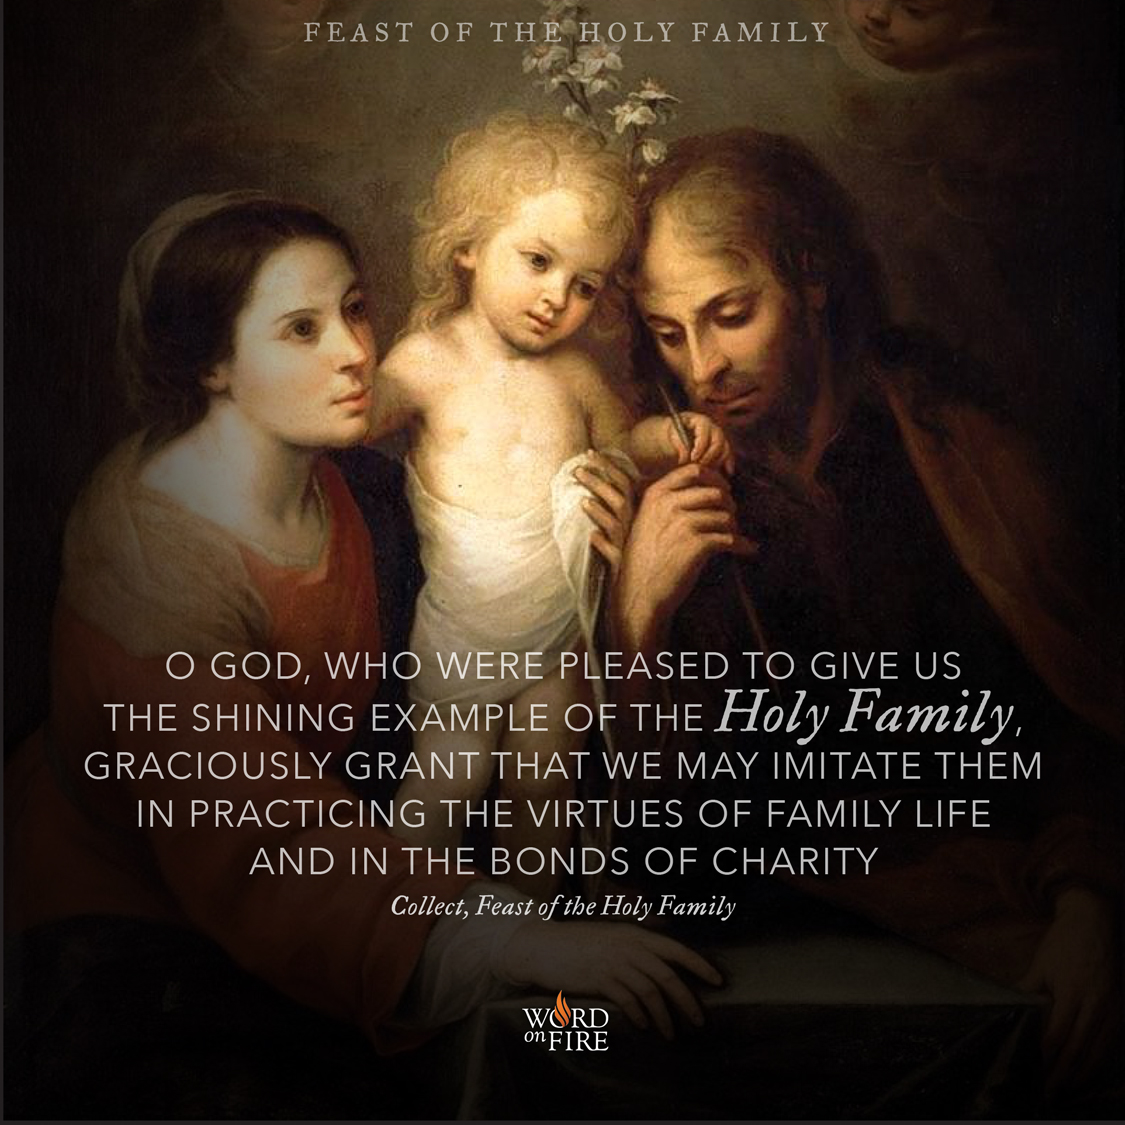 the-feast-of-the-holy-family